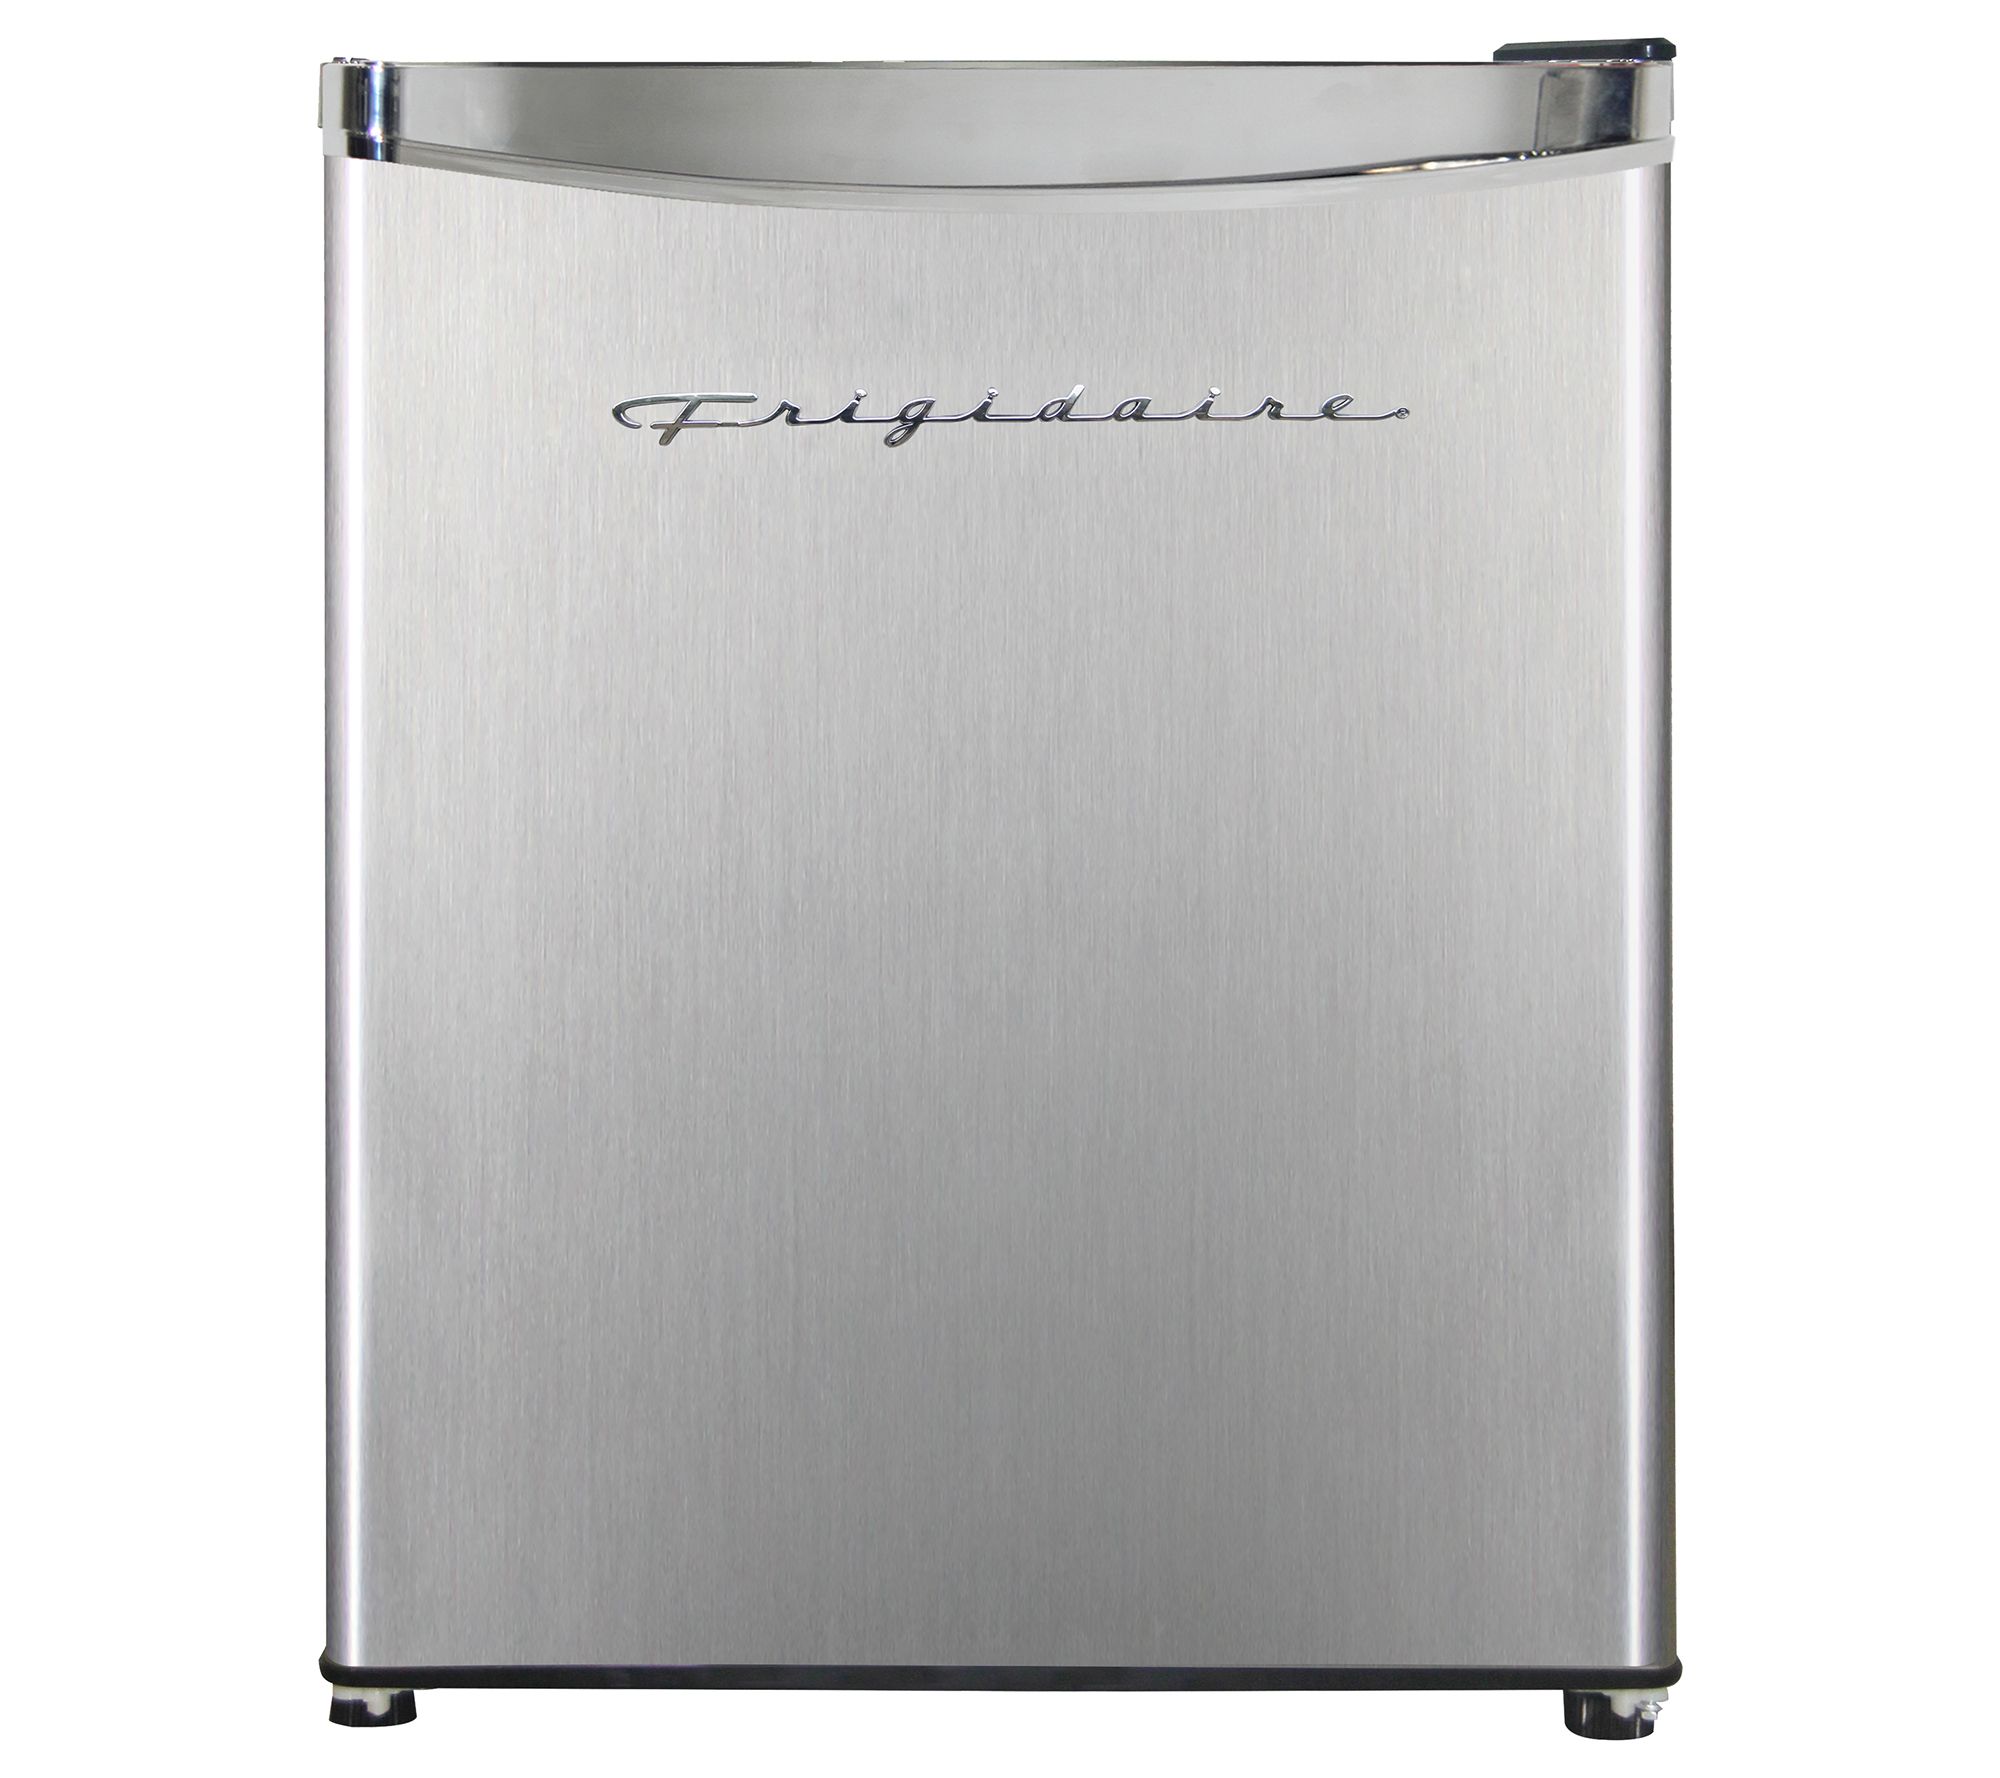 Frigidaire 1.6 cu-ft Retro Style Stainless Steel Compact Refrigerator 